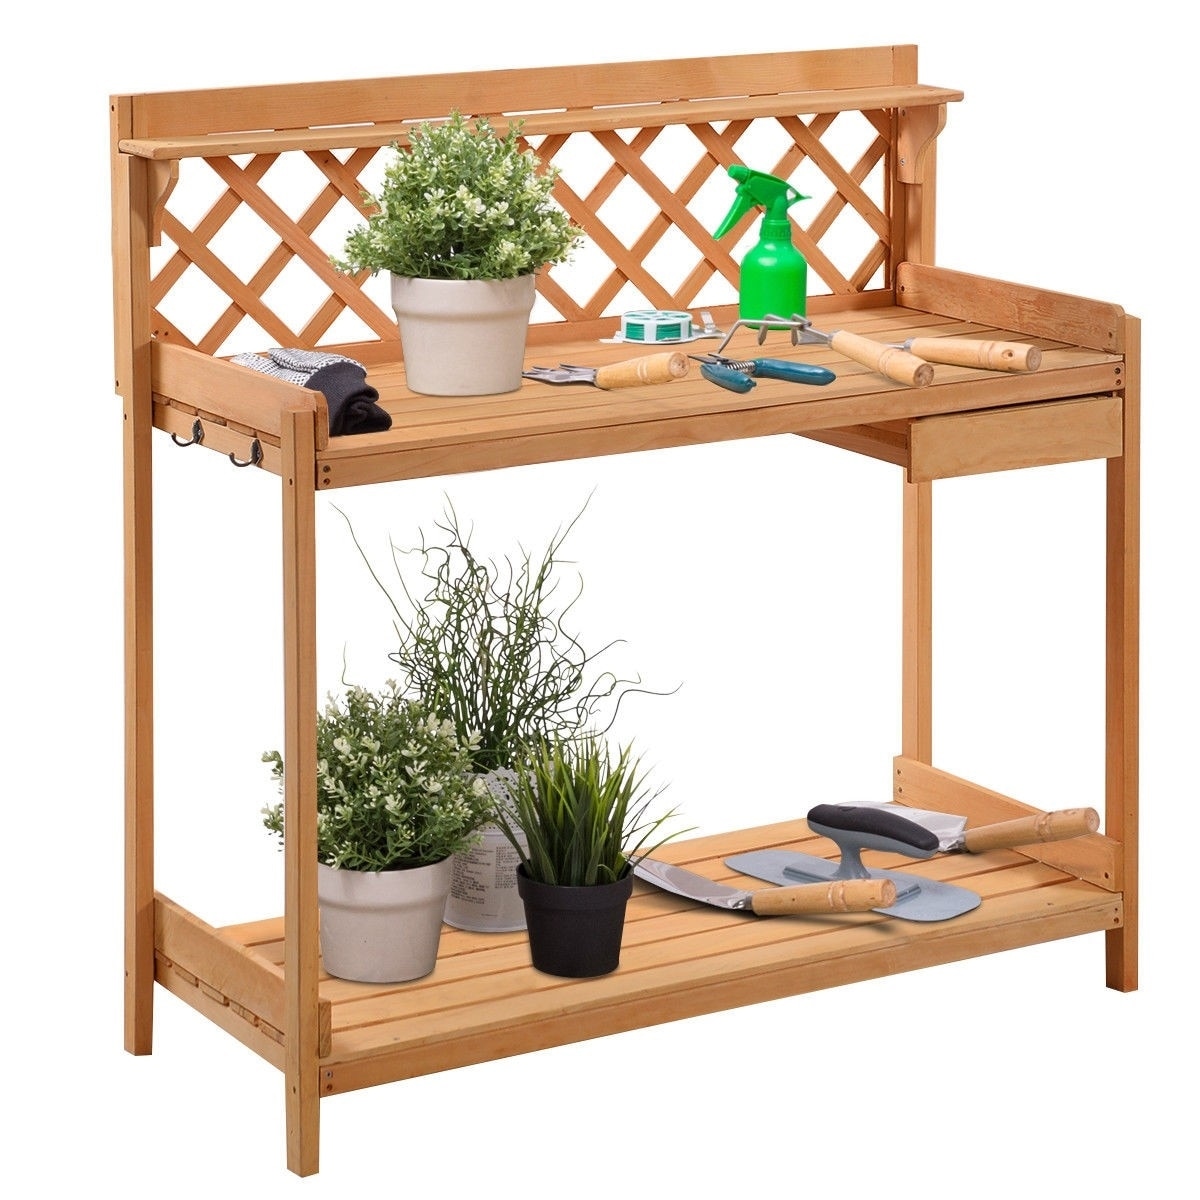 Storage Shelves,Hooks，Sink,Garden Table for Patio Beige HomVent Outdoor Potting Bench Wooden Garden Potting Table w/Drawer Backyard and Porch 